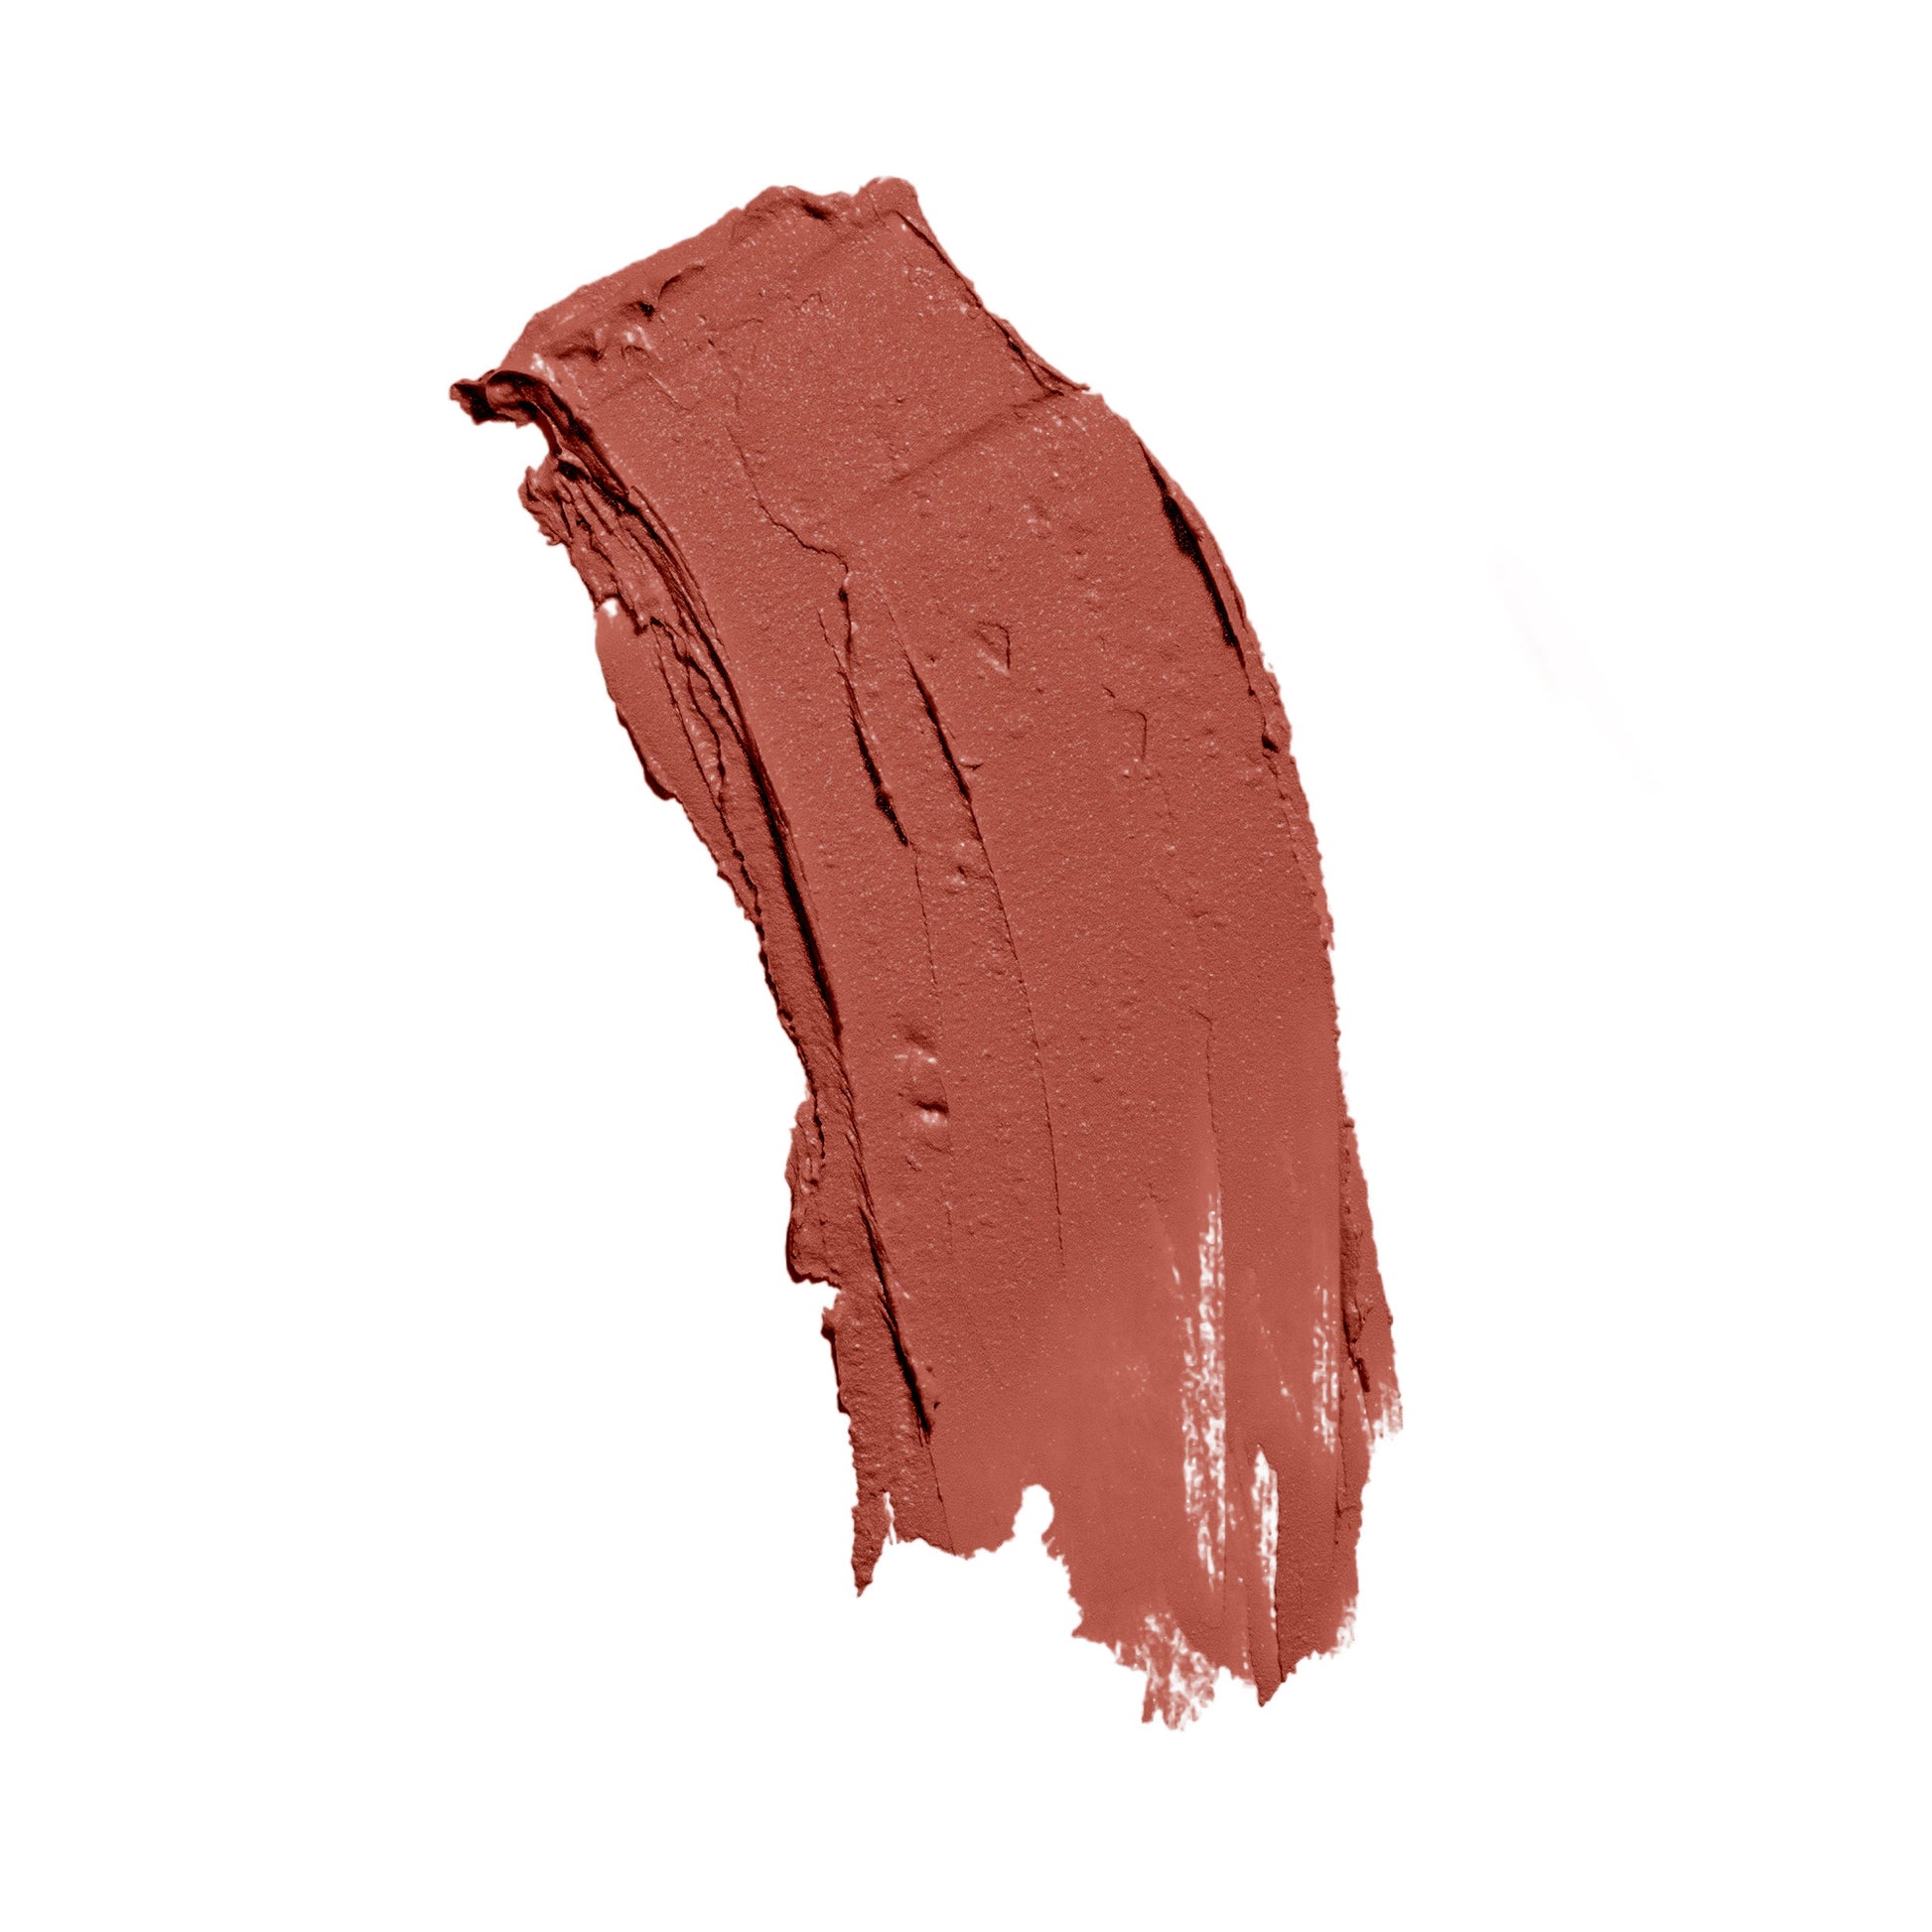 NXTE NXTEssence Heavenly Lip Stick Swatch Color